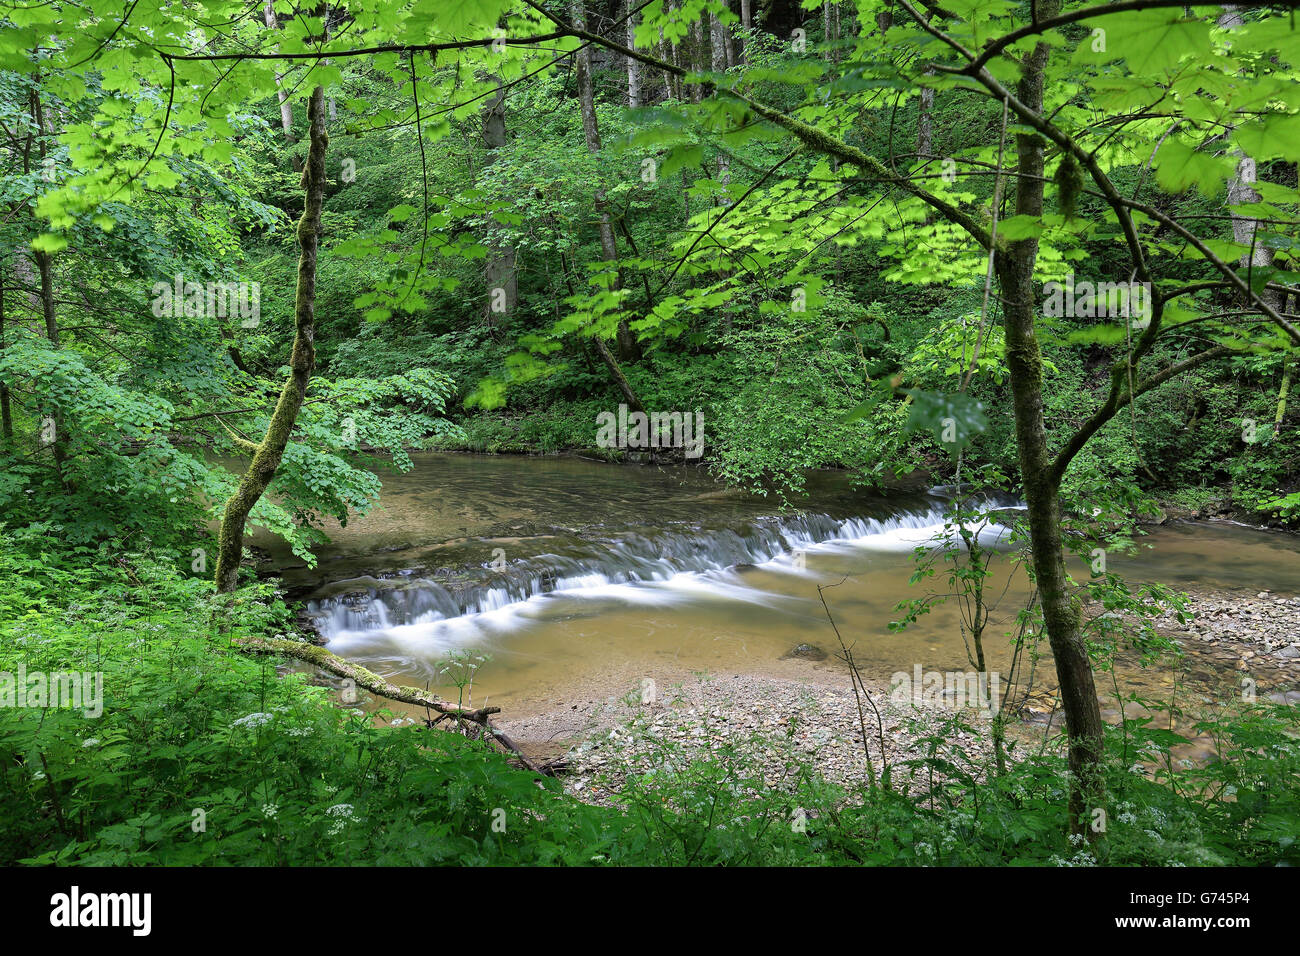 River Gauchach, Gauchach gorge, Black Forest, Baden-Wurttemberg, Germany Stock Photo